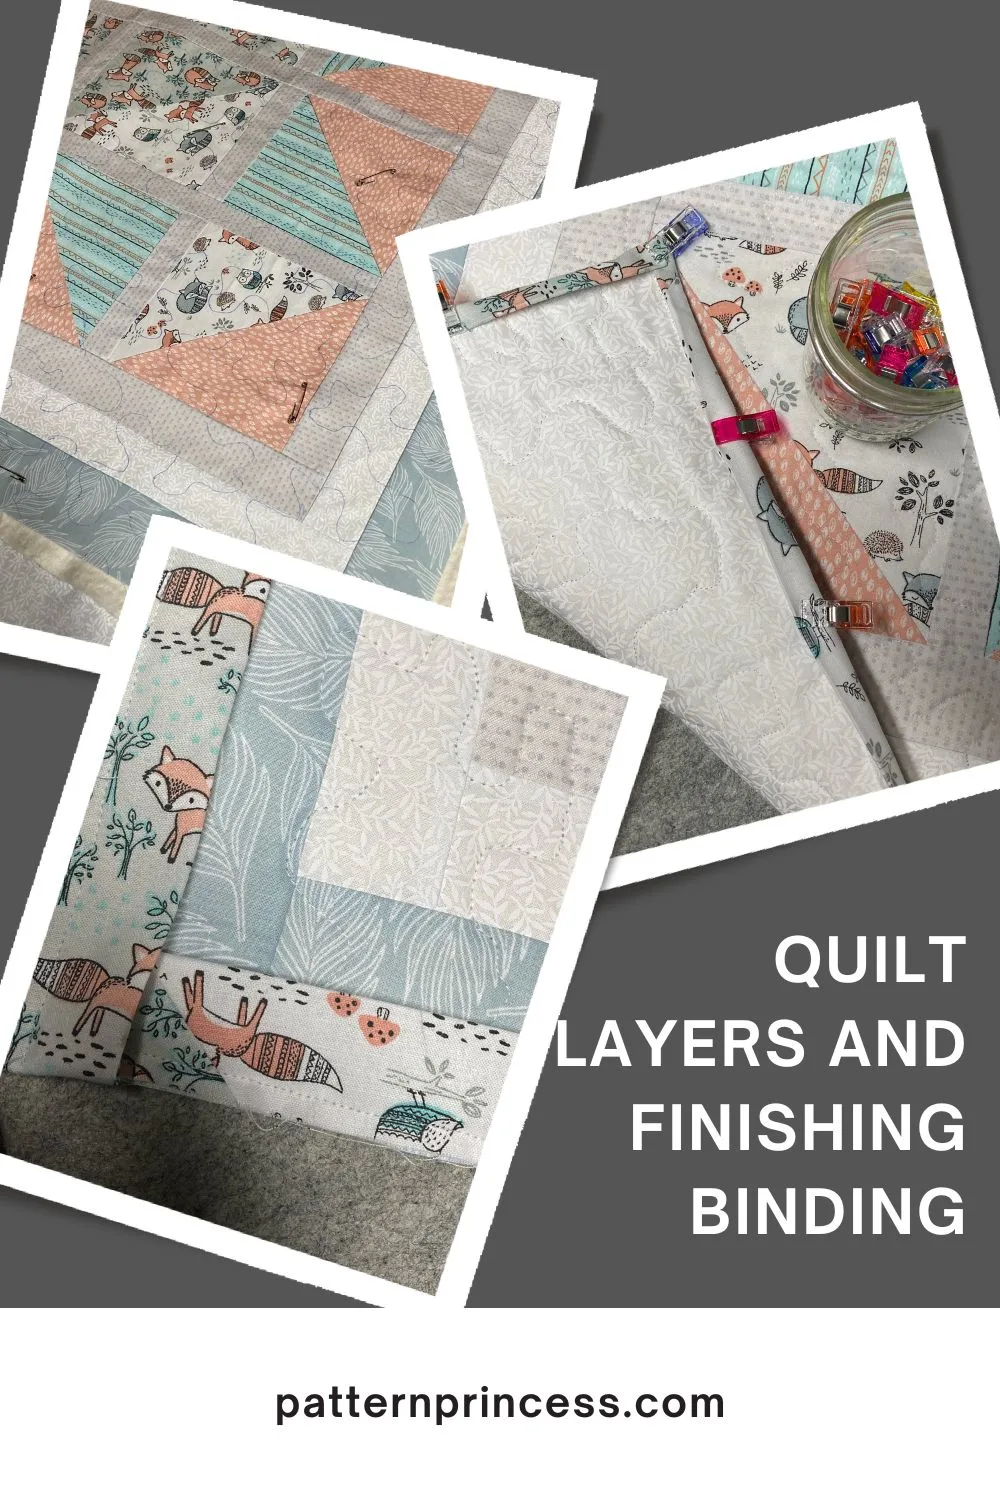 Quilt Layers and Finishing binding